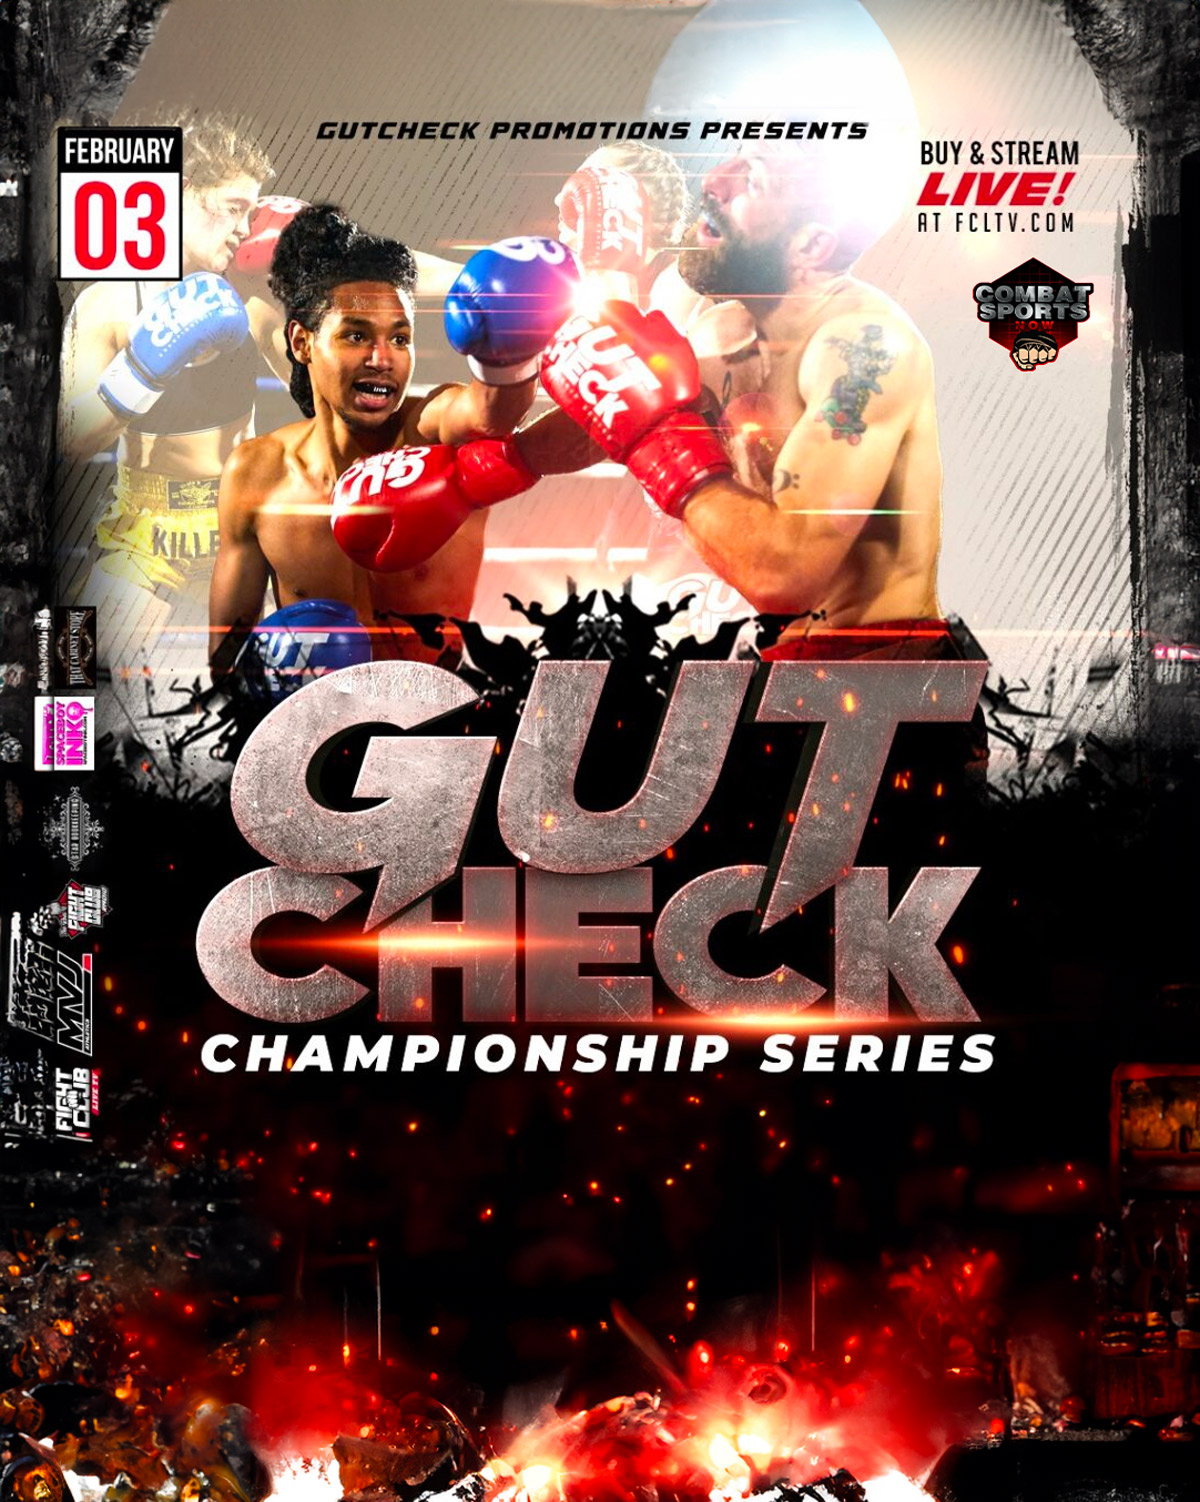 Watch FCLTV Presents Gut Check Promotions Championship Series 2 on Combat Sports Now